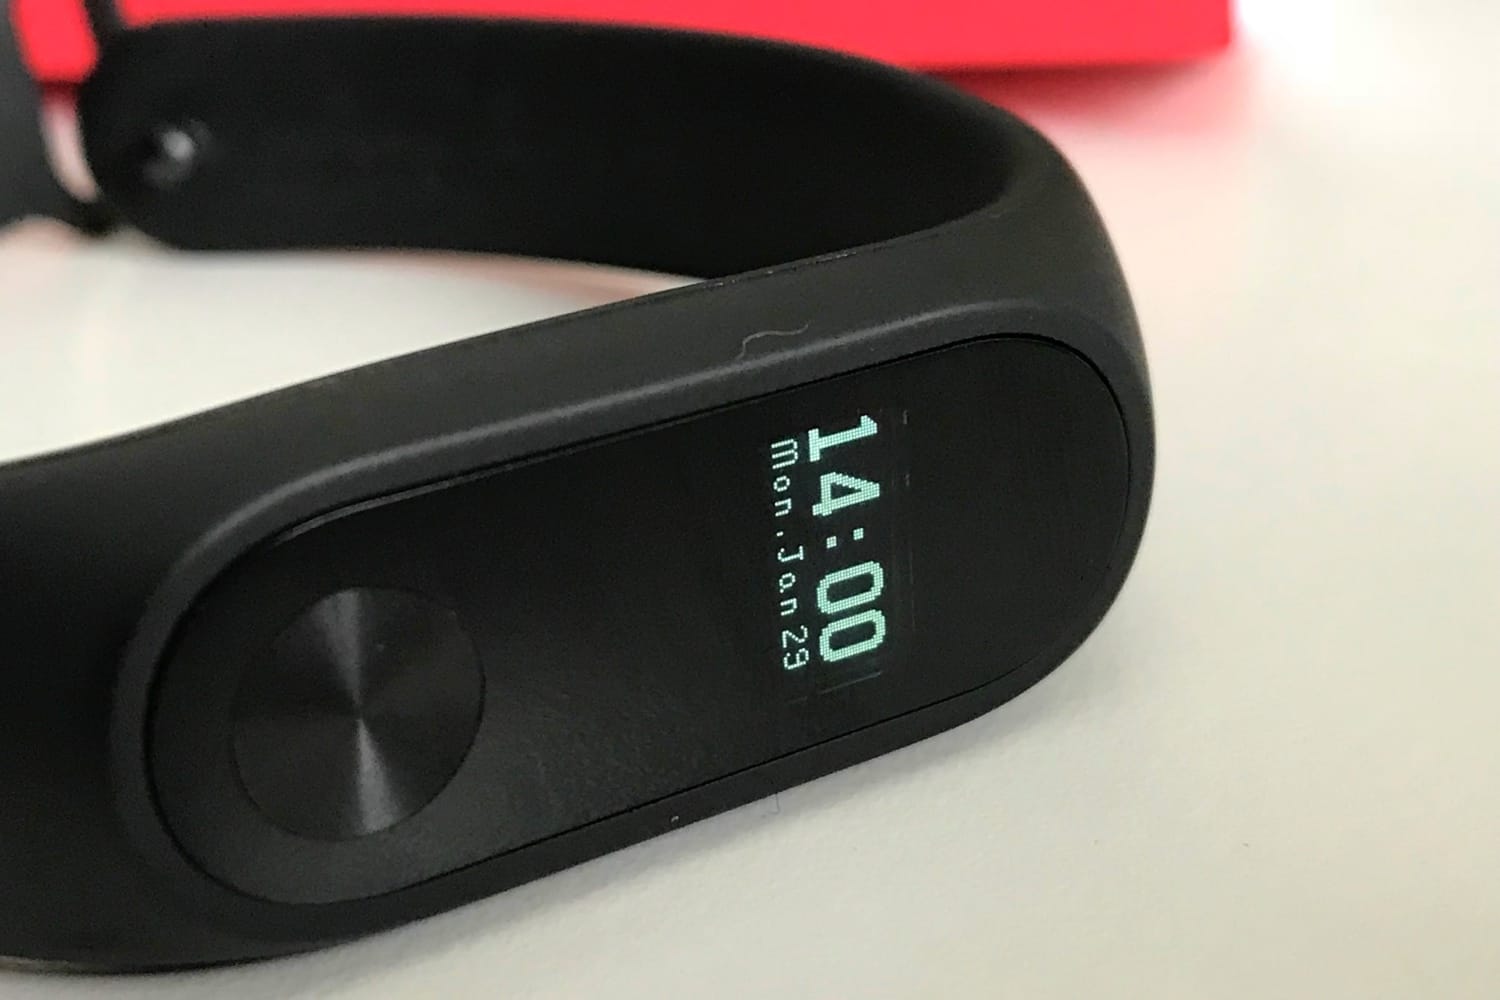 Xiaomi showed the first image of Mi Band 3